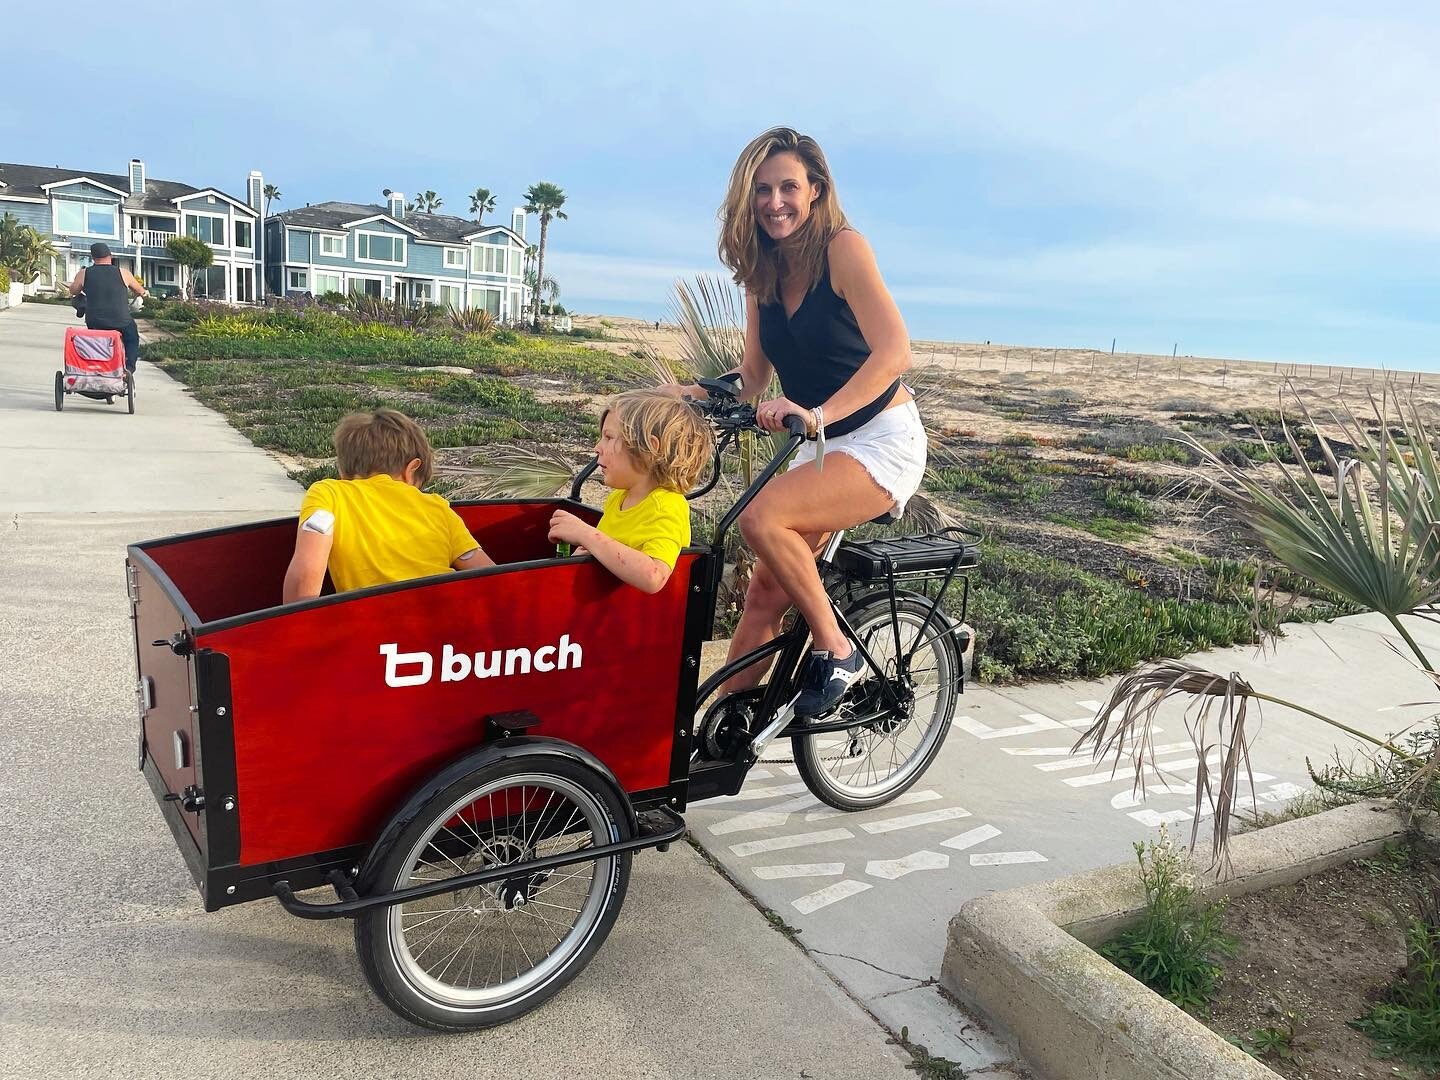 This is now a @bunchbikes fan account. 🚲